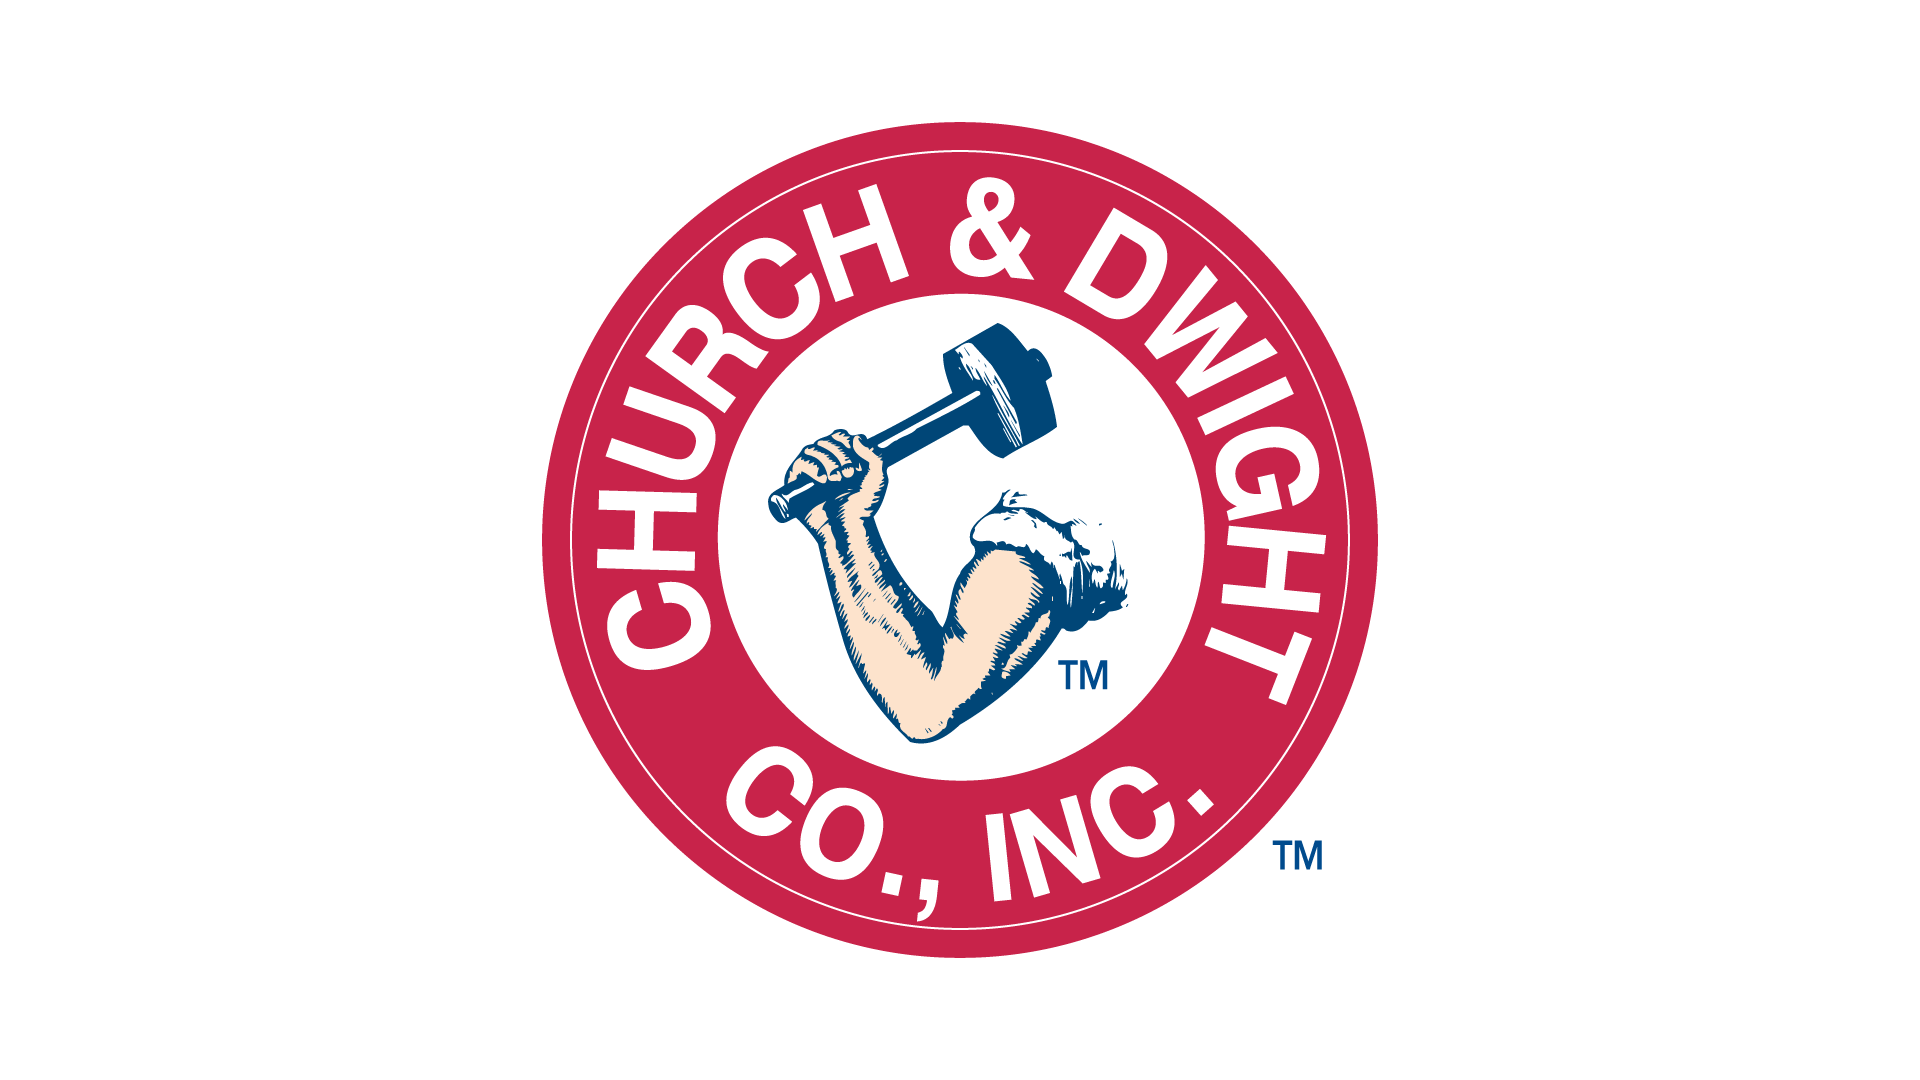 church-dwight-is-too-expensive-for-now-church-dwight-co-inc